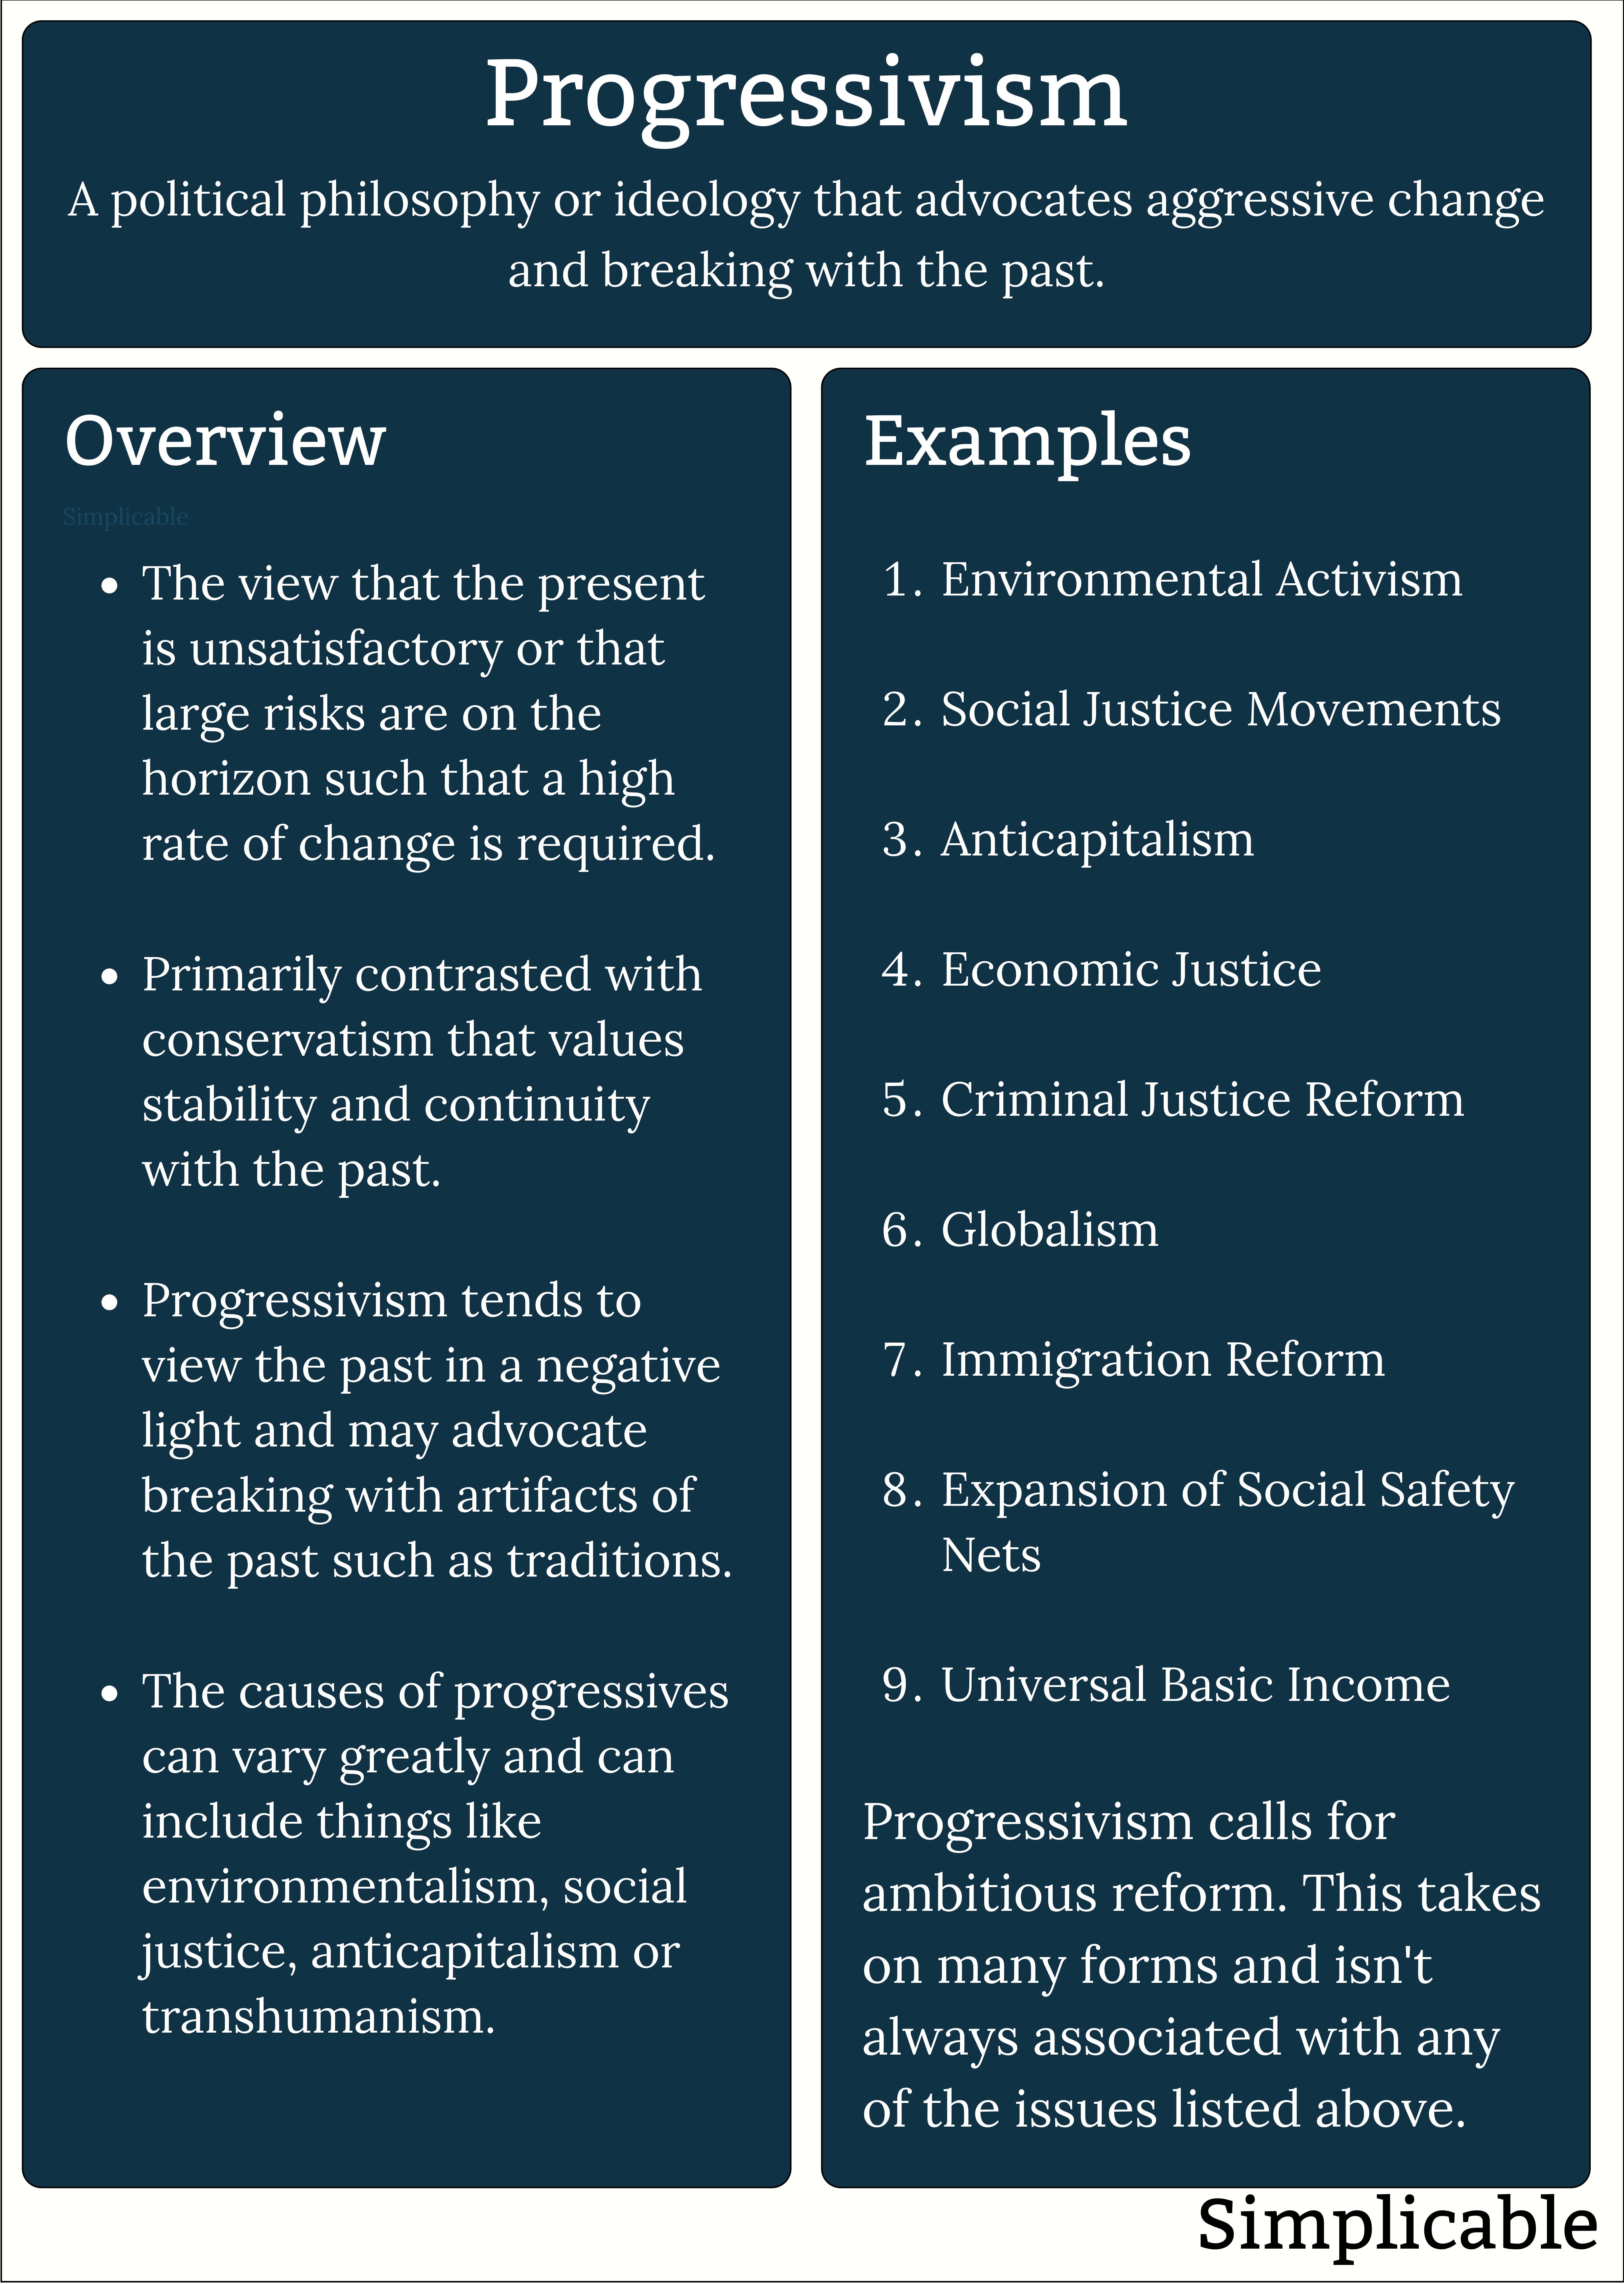 Progressivism overview and examples